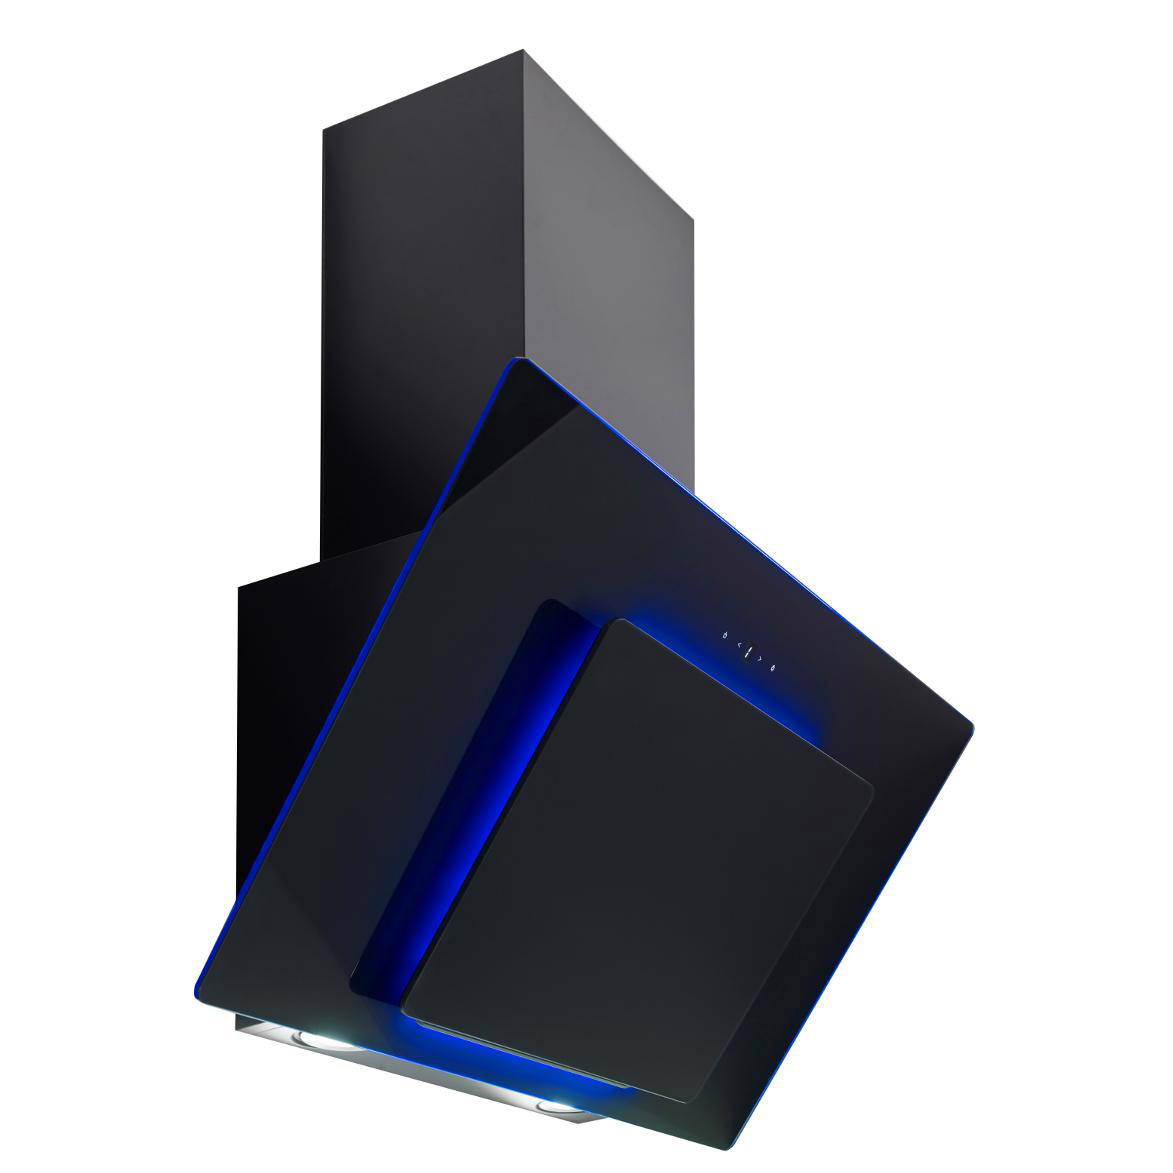 Image of Culina UBHHH90BK 90cm Angled Chimney Hood in Black Glass Touch Control